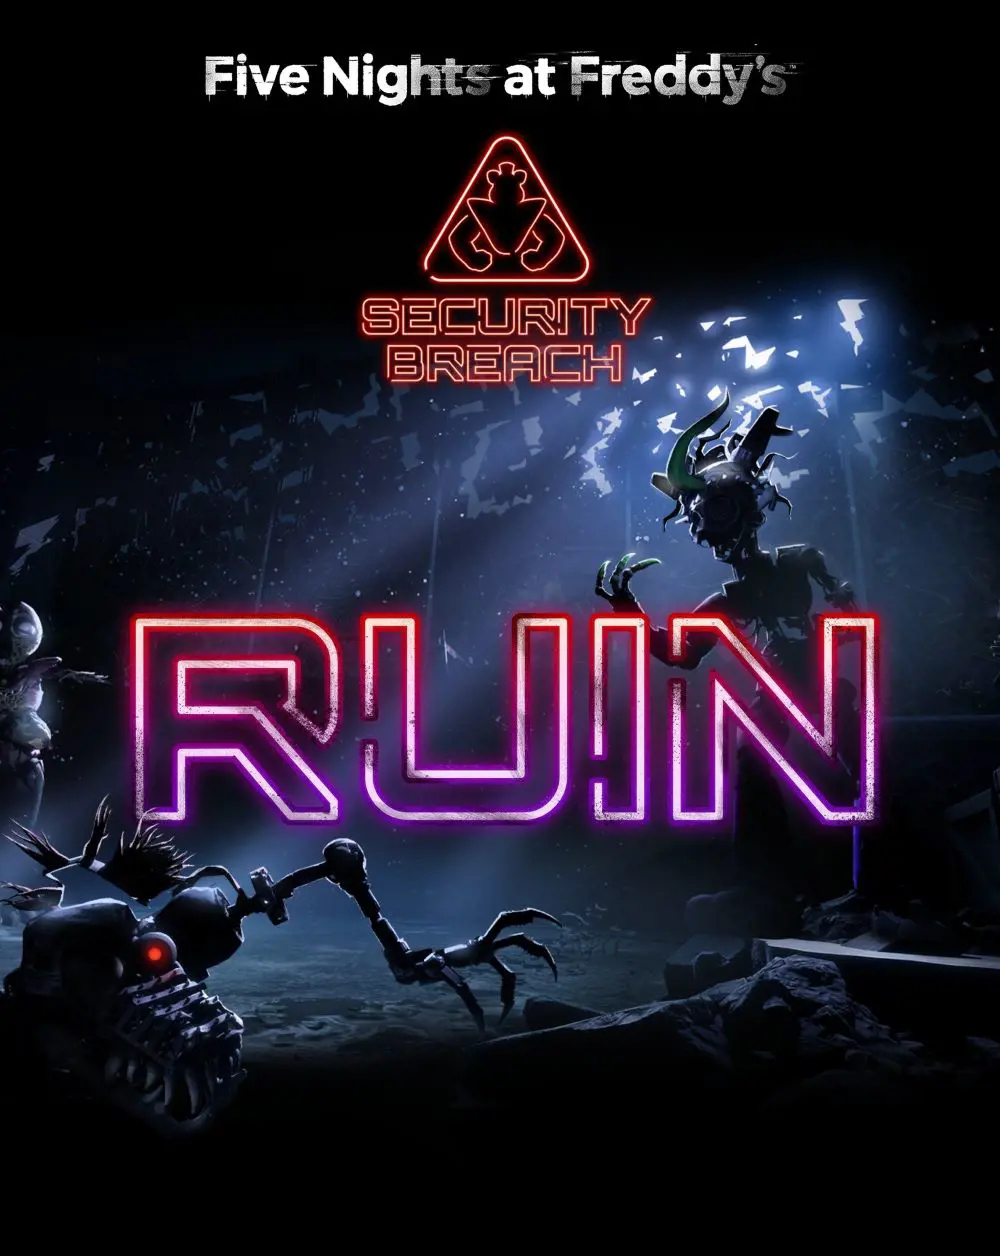 Five Nights at Freddy's: Security Breach Ruin is a free DLC expansion released on July 25, 2023, on Microsoft Windows, Playstation 4, and Playstation 5